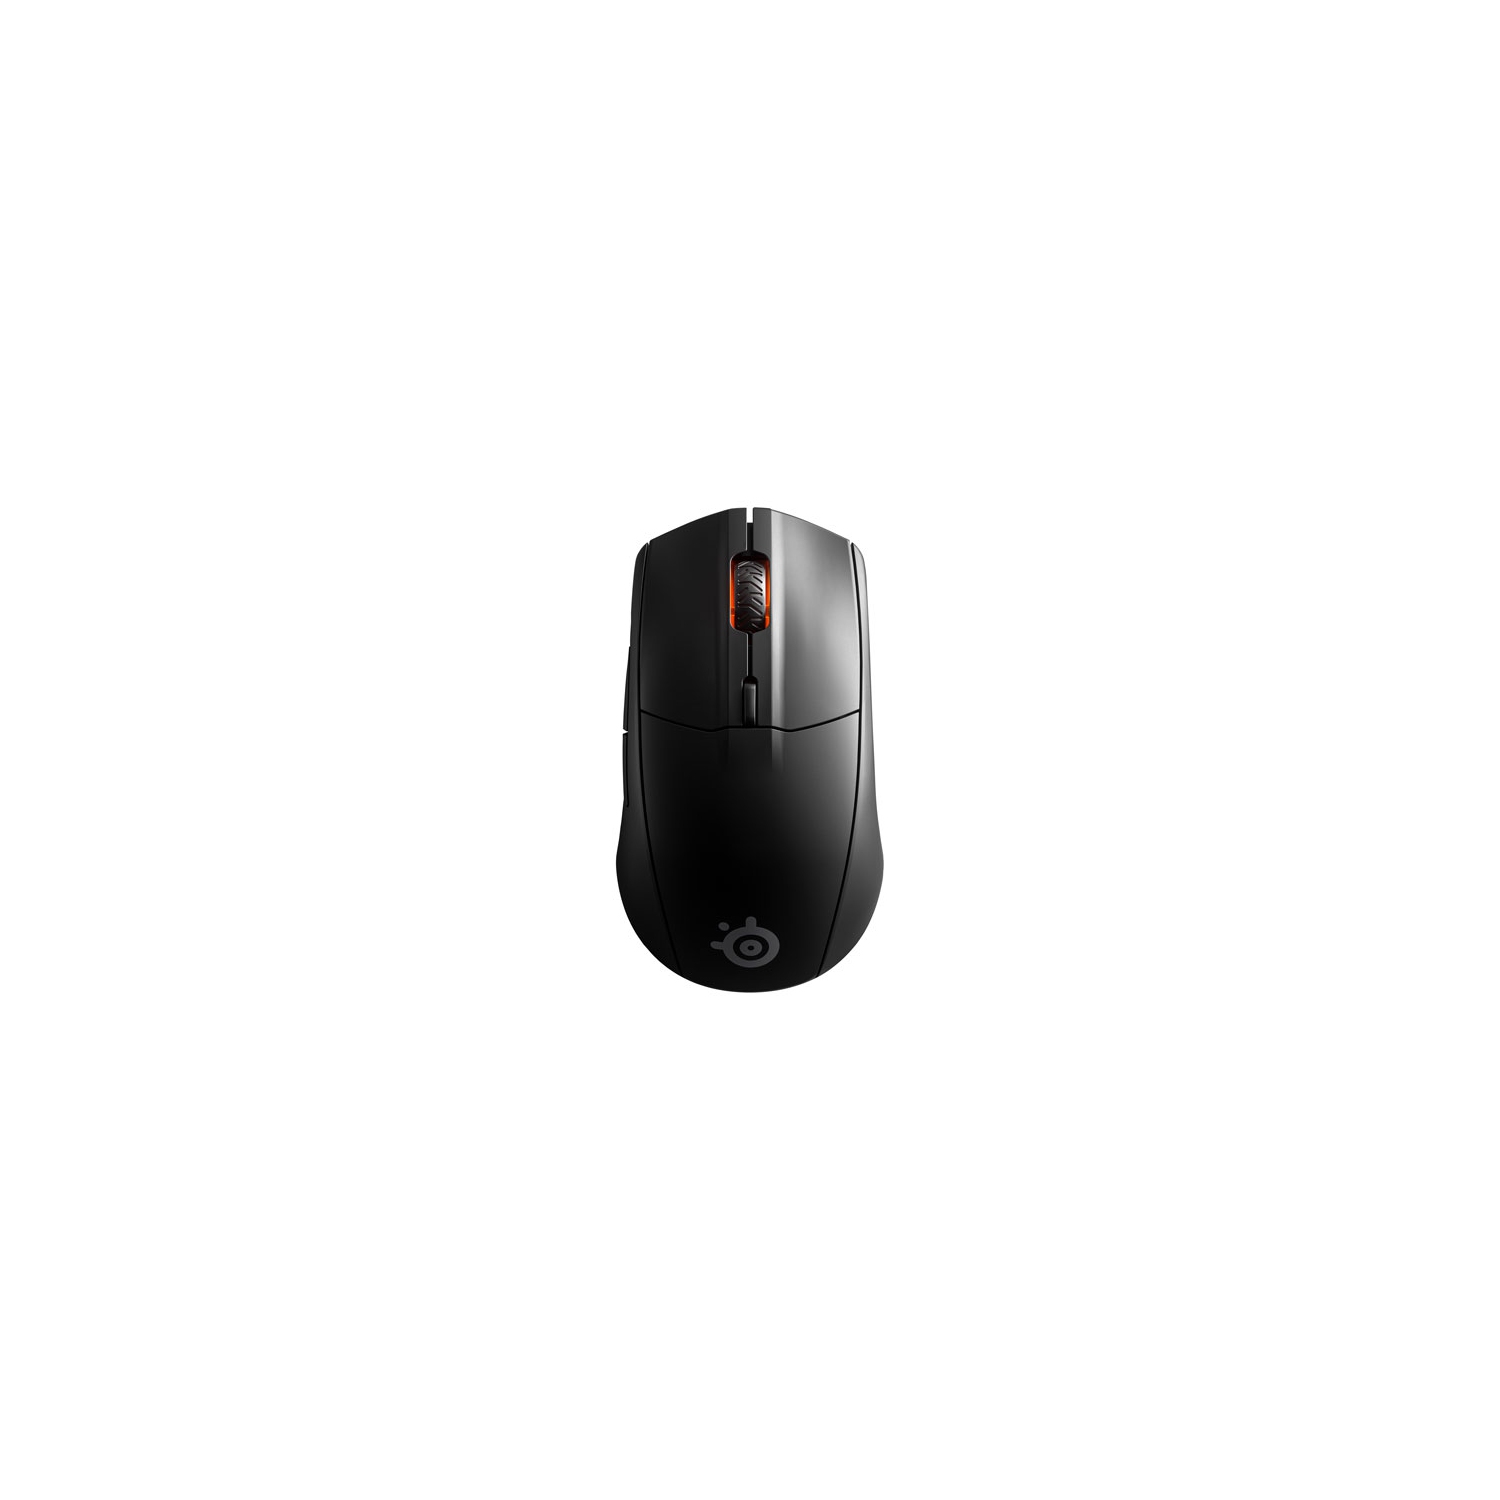 Refurbished (Excellent) - SteelSeries Rival 3 18000 DPI Bluetooth Optical Gaming Mouse - Black